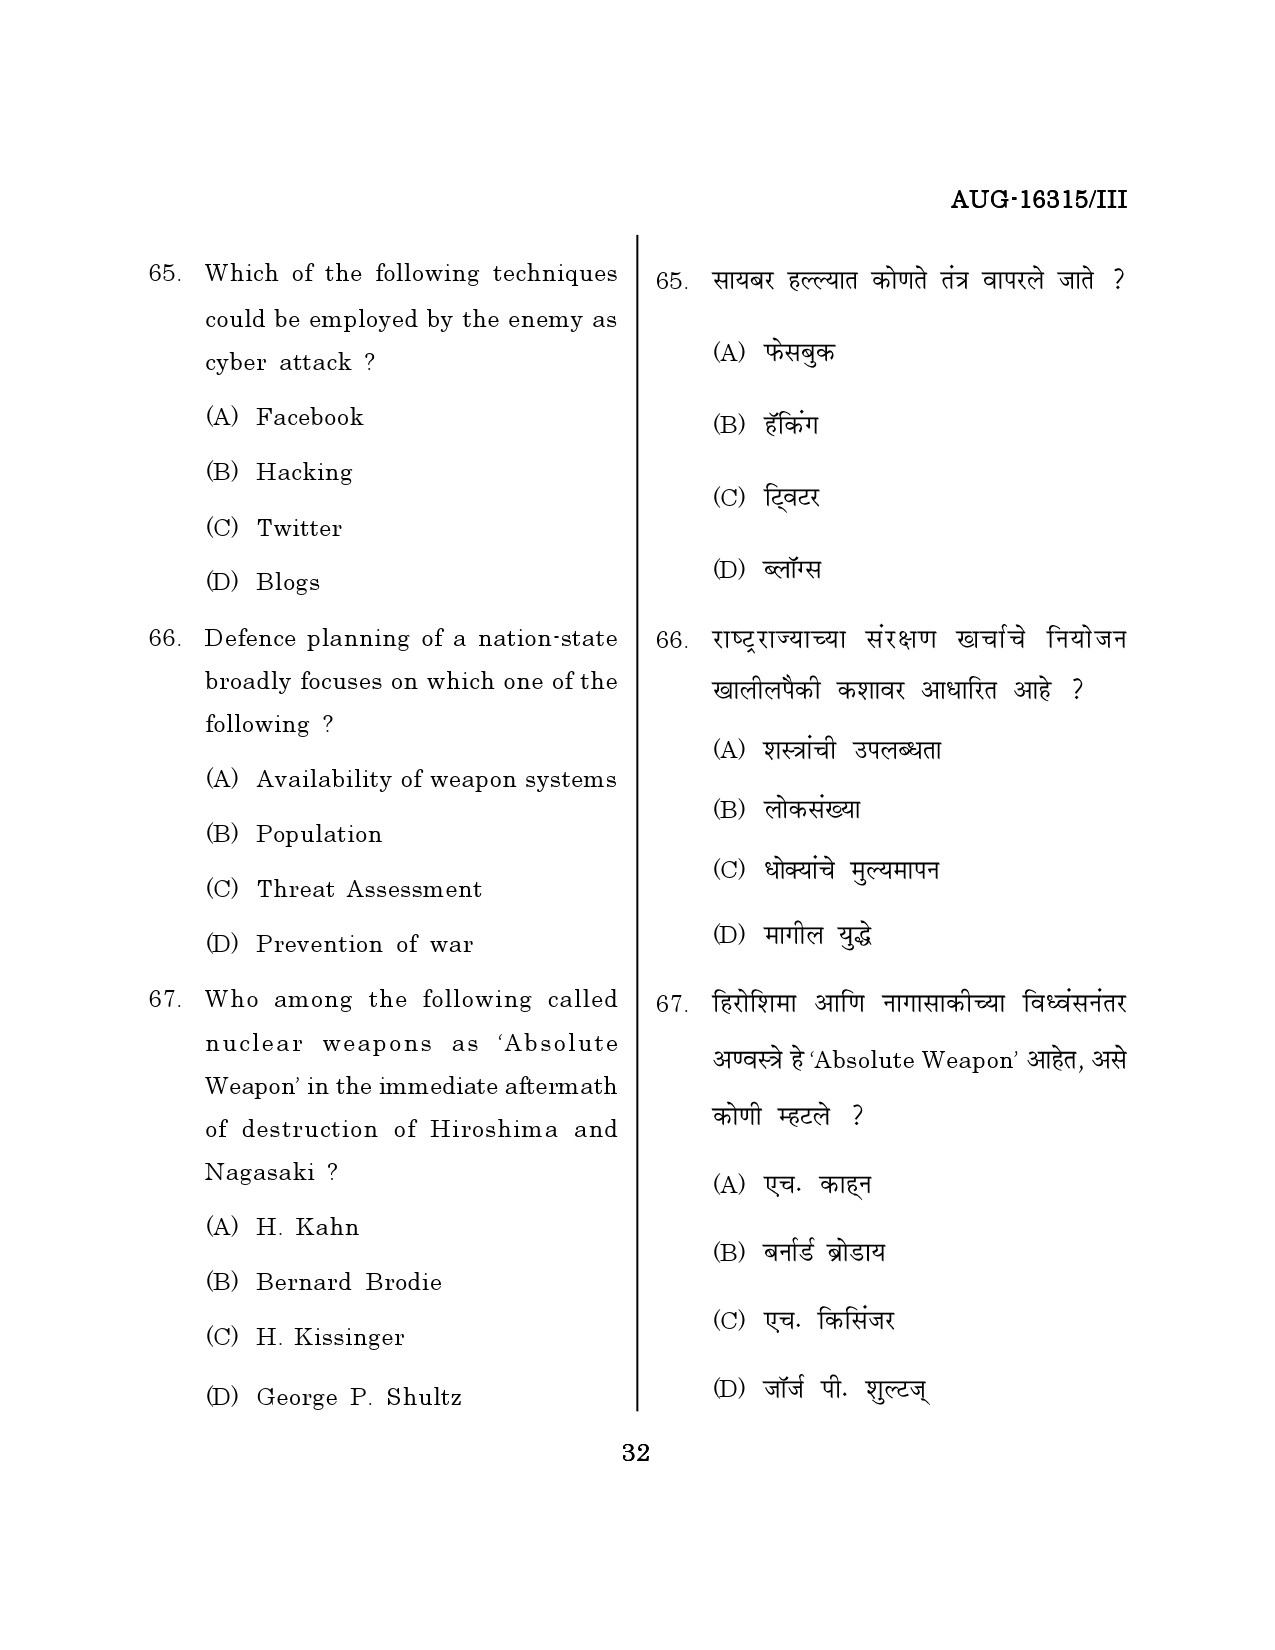 Maharashtra SET Defence and Strategic Studies Question Paper III August 2015 31